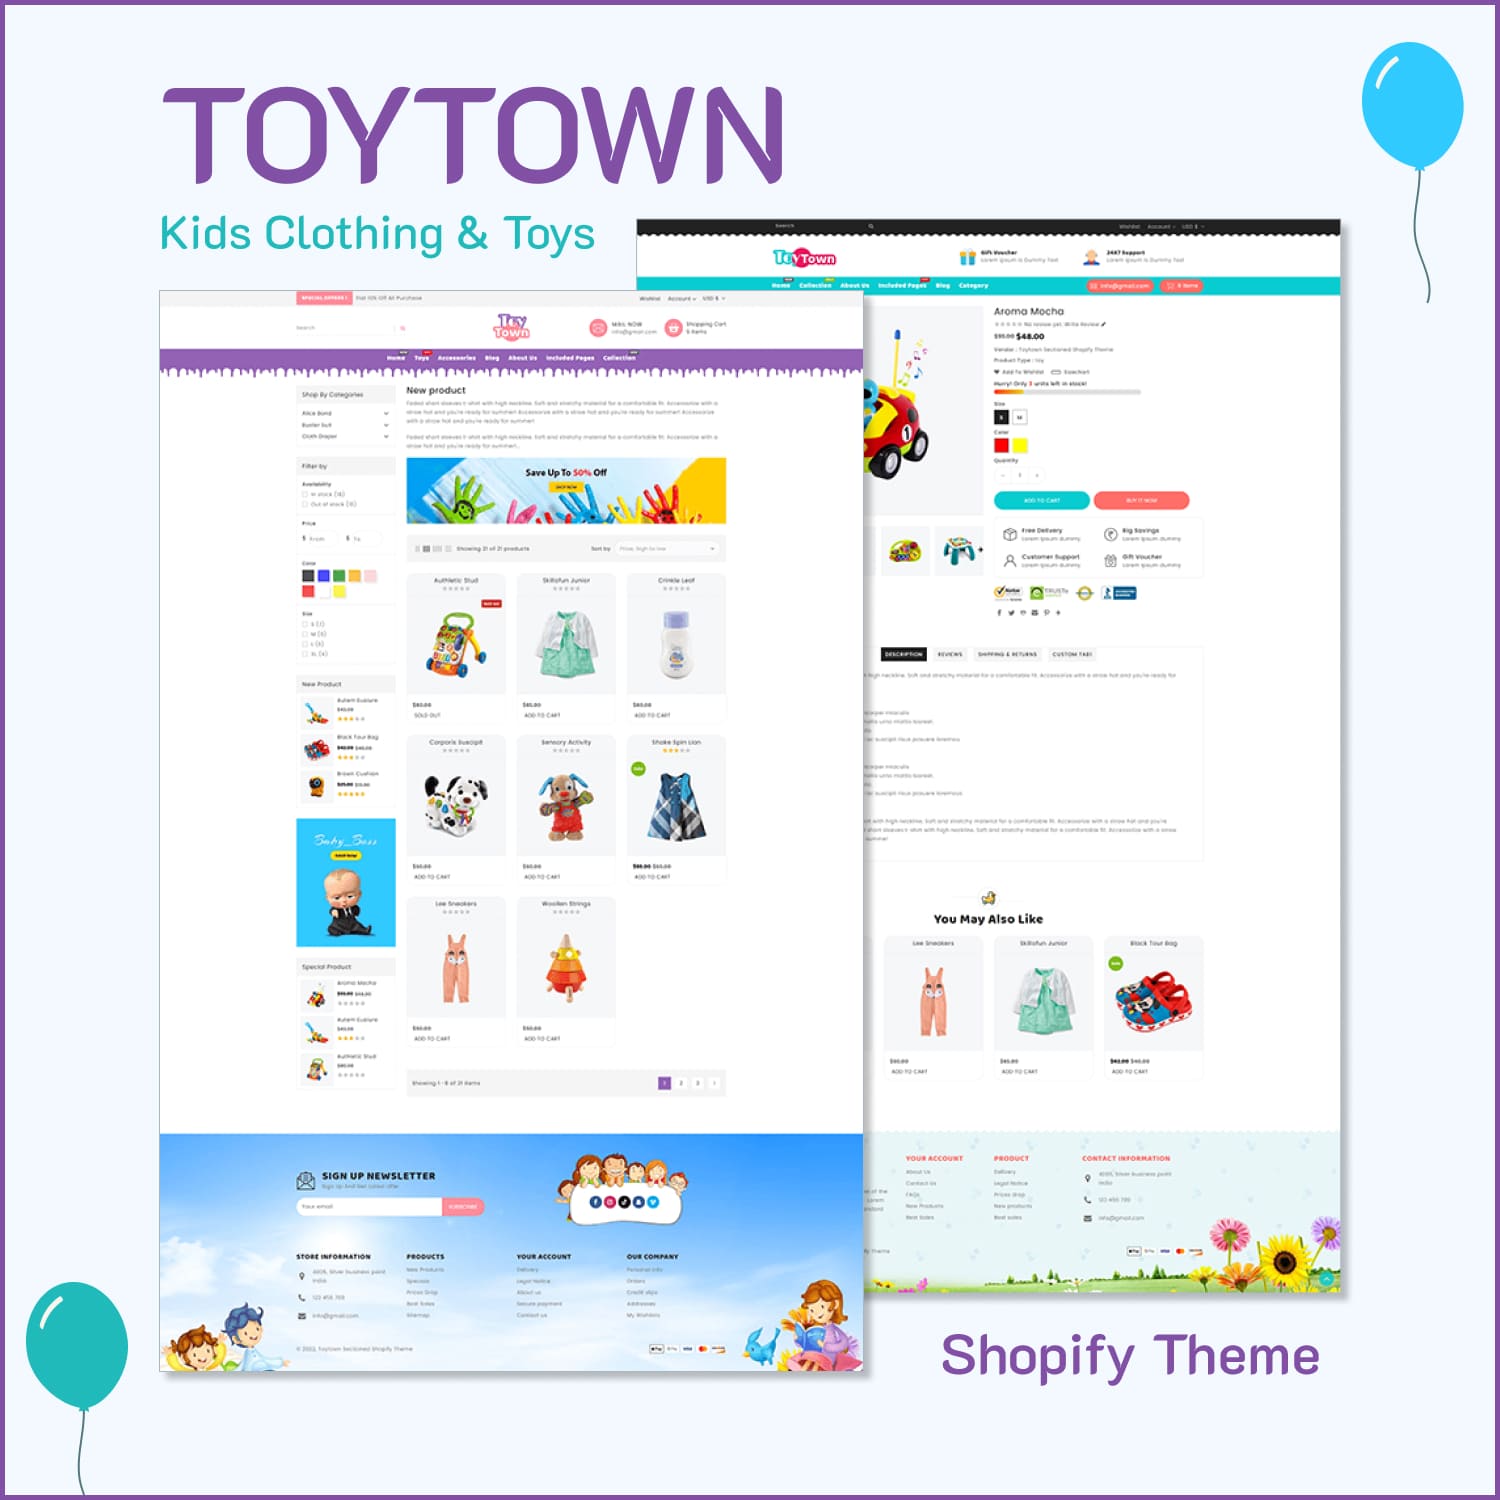 Toytown kids clothing and toys.